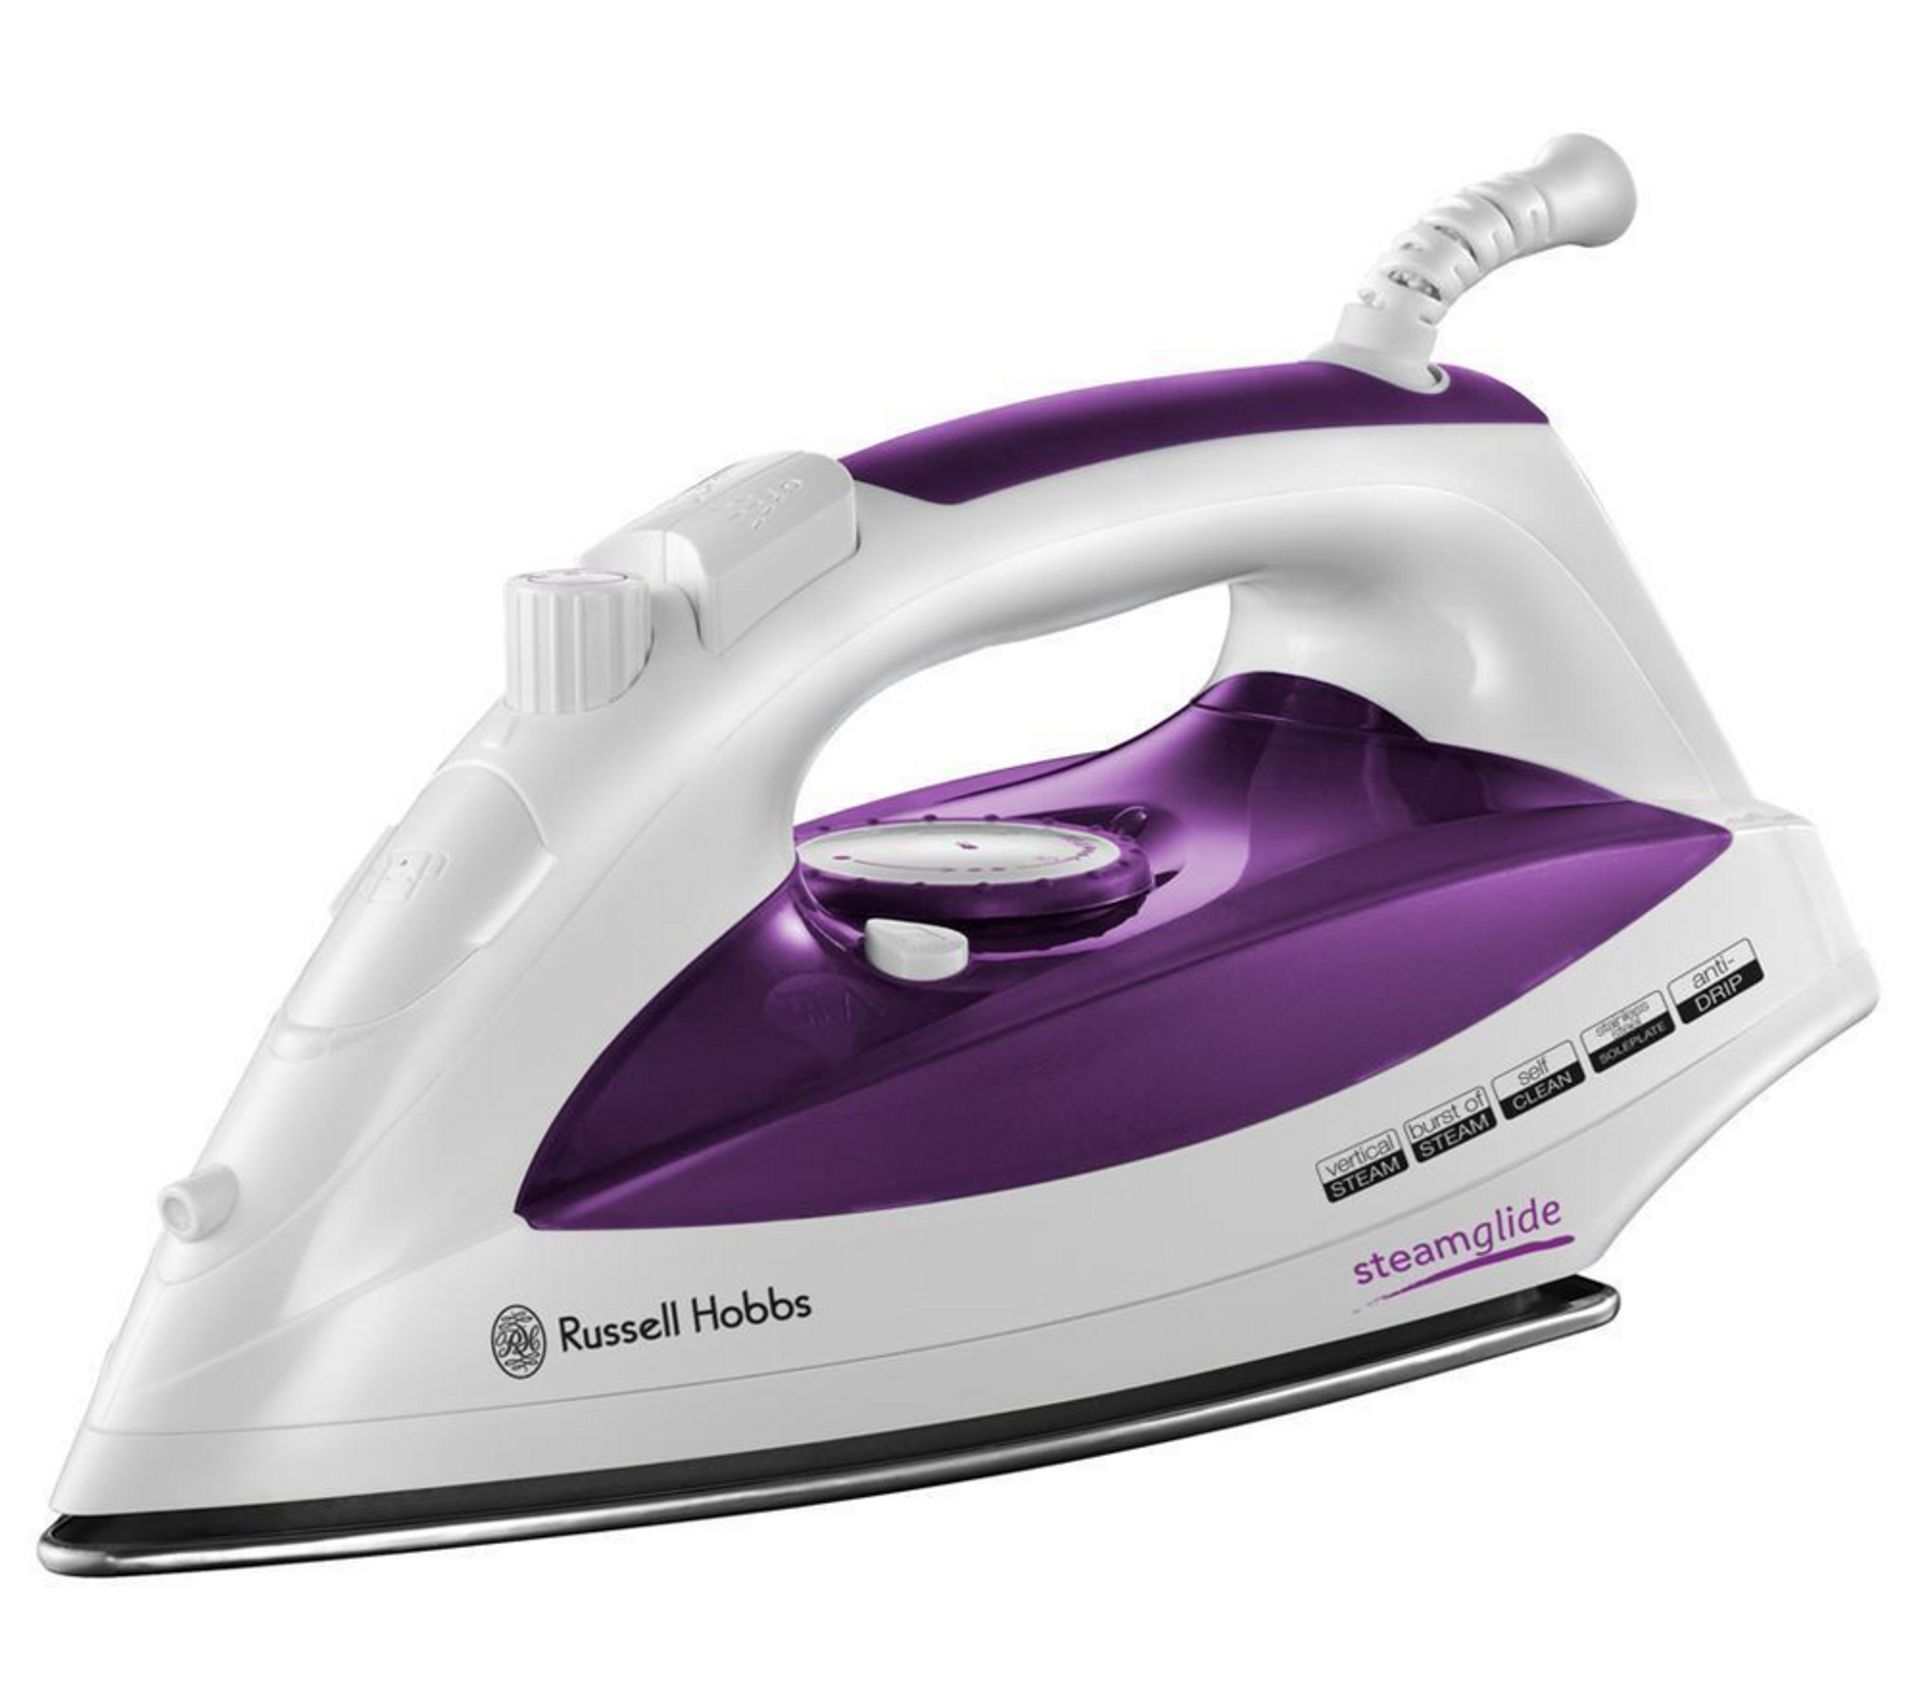 Brand New Russell Hobbs Steamglide Iron 2400W - Stainless Steel Plate - Self Clean- Anti Drip - ISP